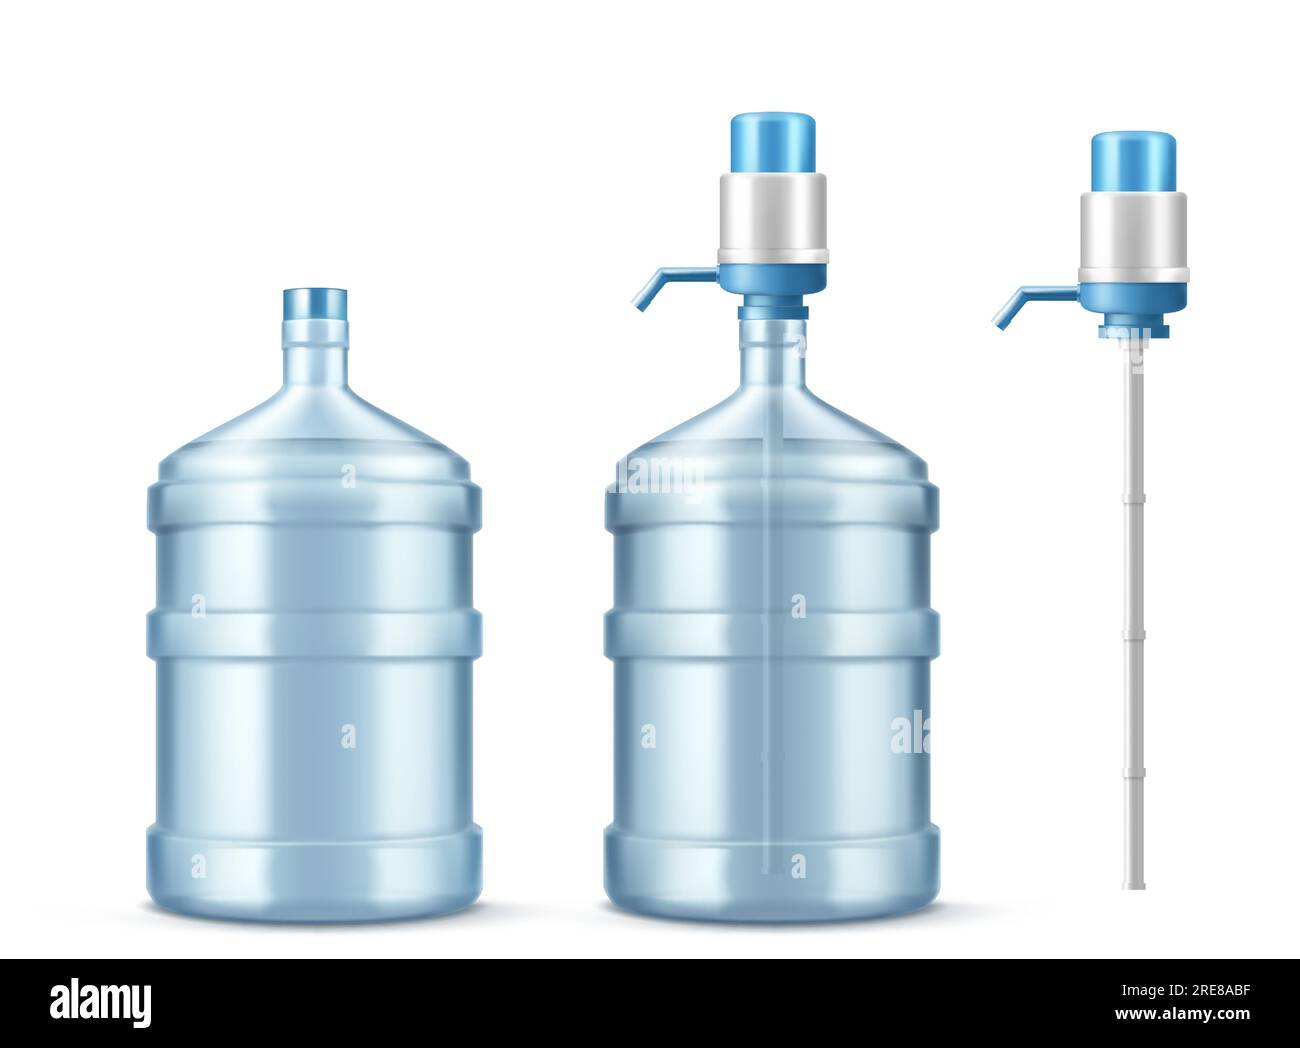 https://c8.alamy.com/comp/2RE8ABF/pump-water-cooler-and-big-bottle-for-office-and-home-vector-realistic-mockup-of-dispenser-with-pump-for-pouring-clean-water-and-large-plastic-gallon-isolated-on-white-background-2RE8ABF.jpg